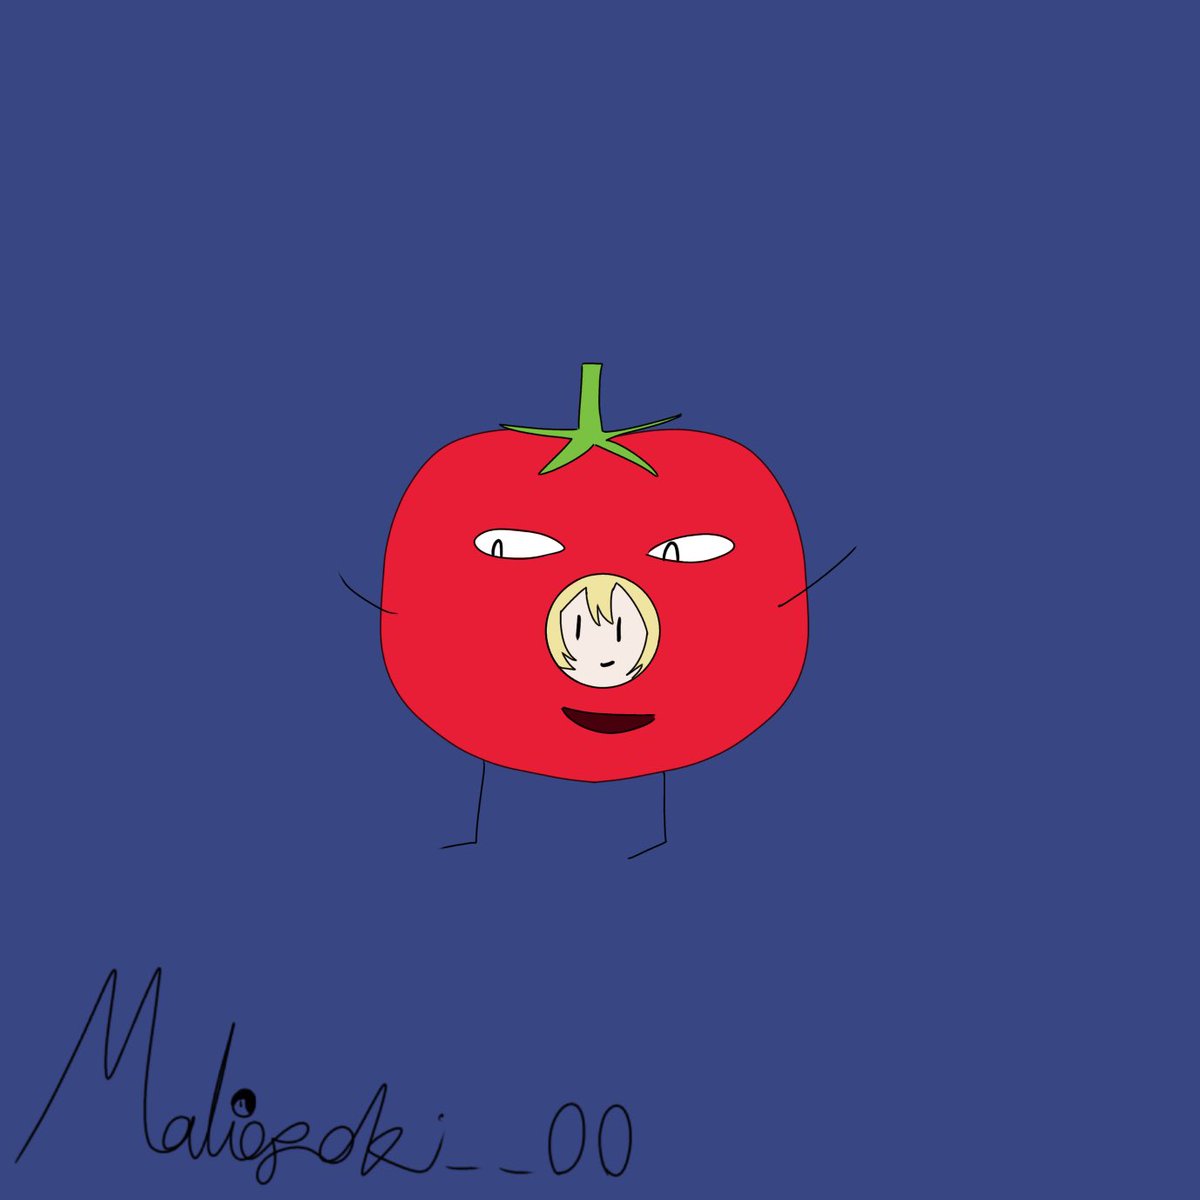 Here Is Another Dokibird Art!!!! Drew Her In A Tomato Costume. I Hope You Enjoy. 😊- Mabopoki #DokiGallery #Dokibird